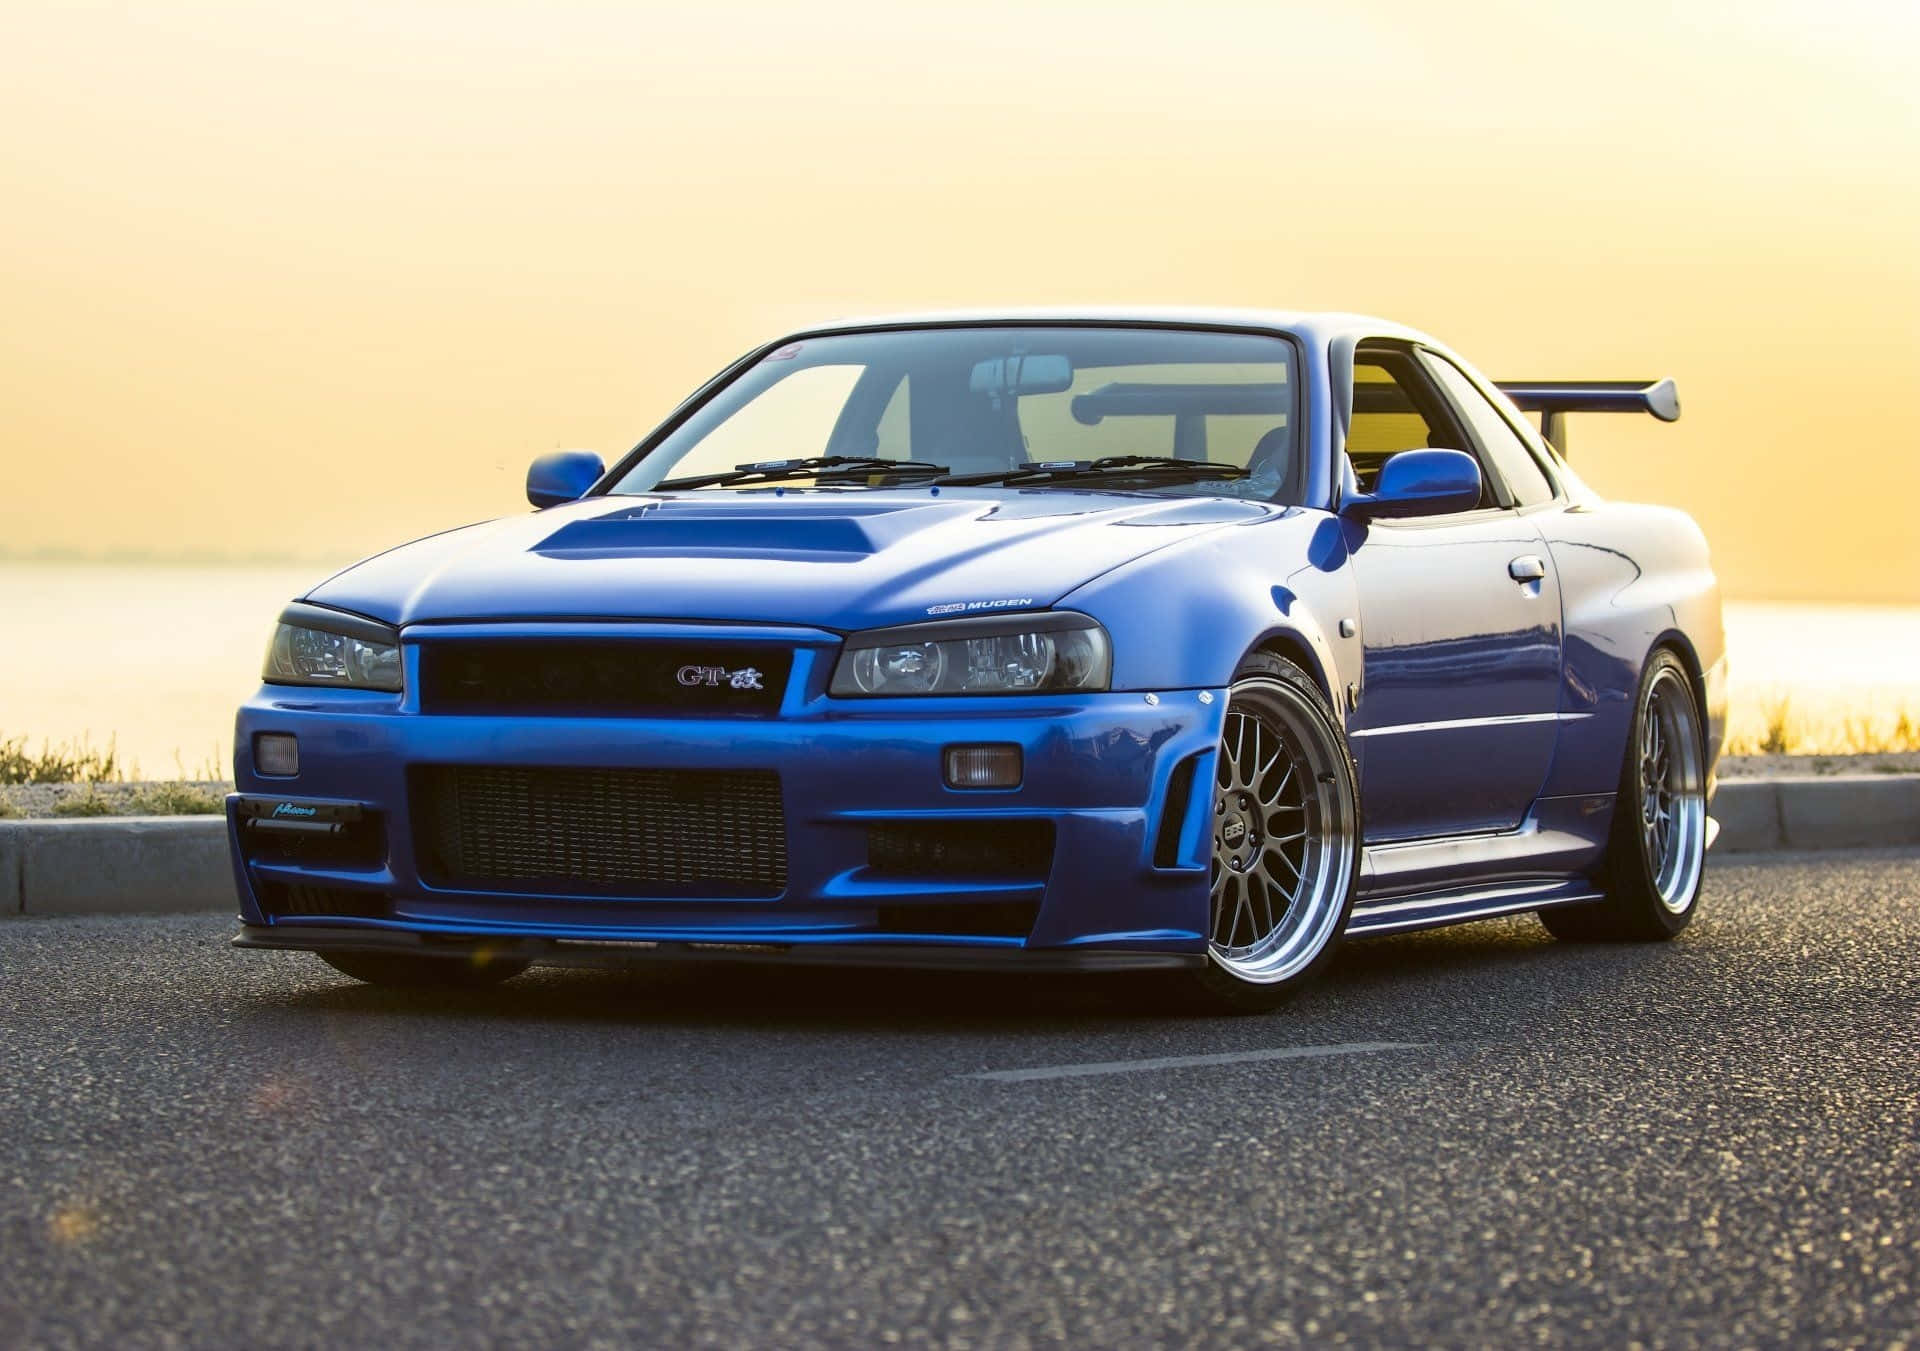 “Experience the Power of Cool Nissan Skyline” Wallpaper